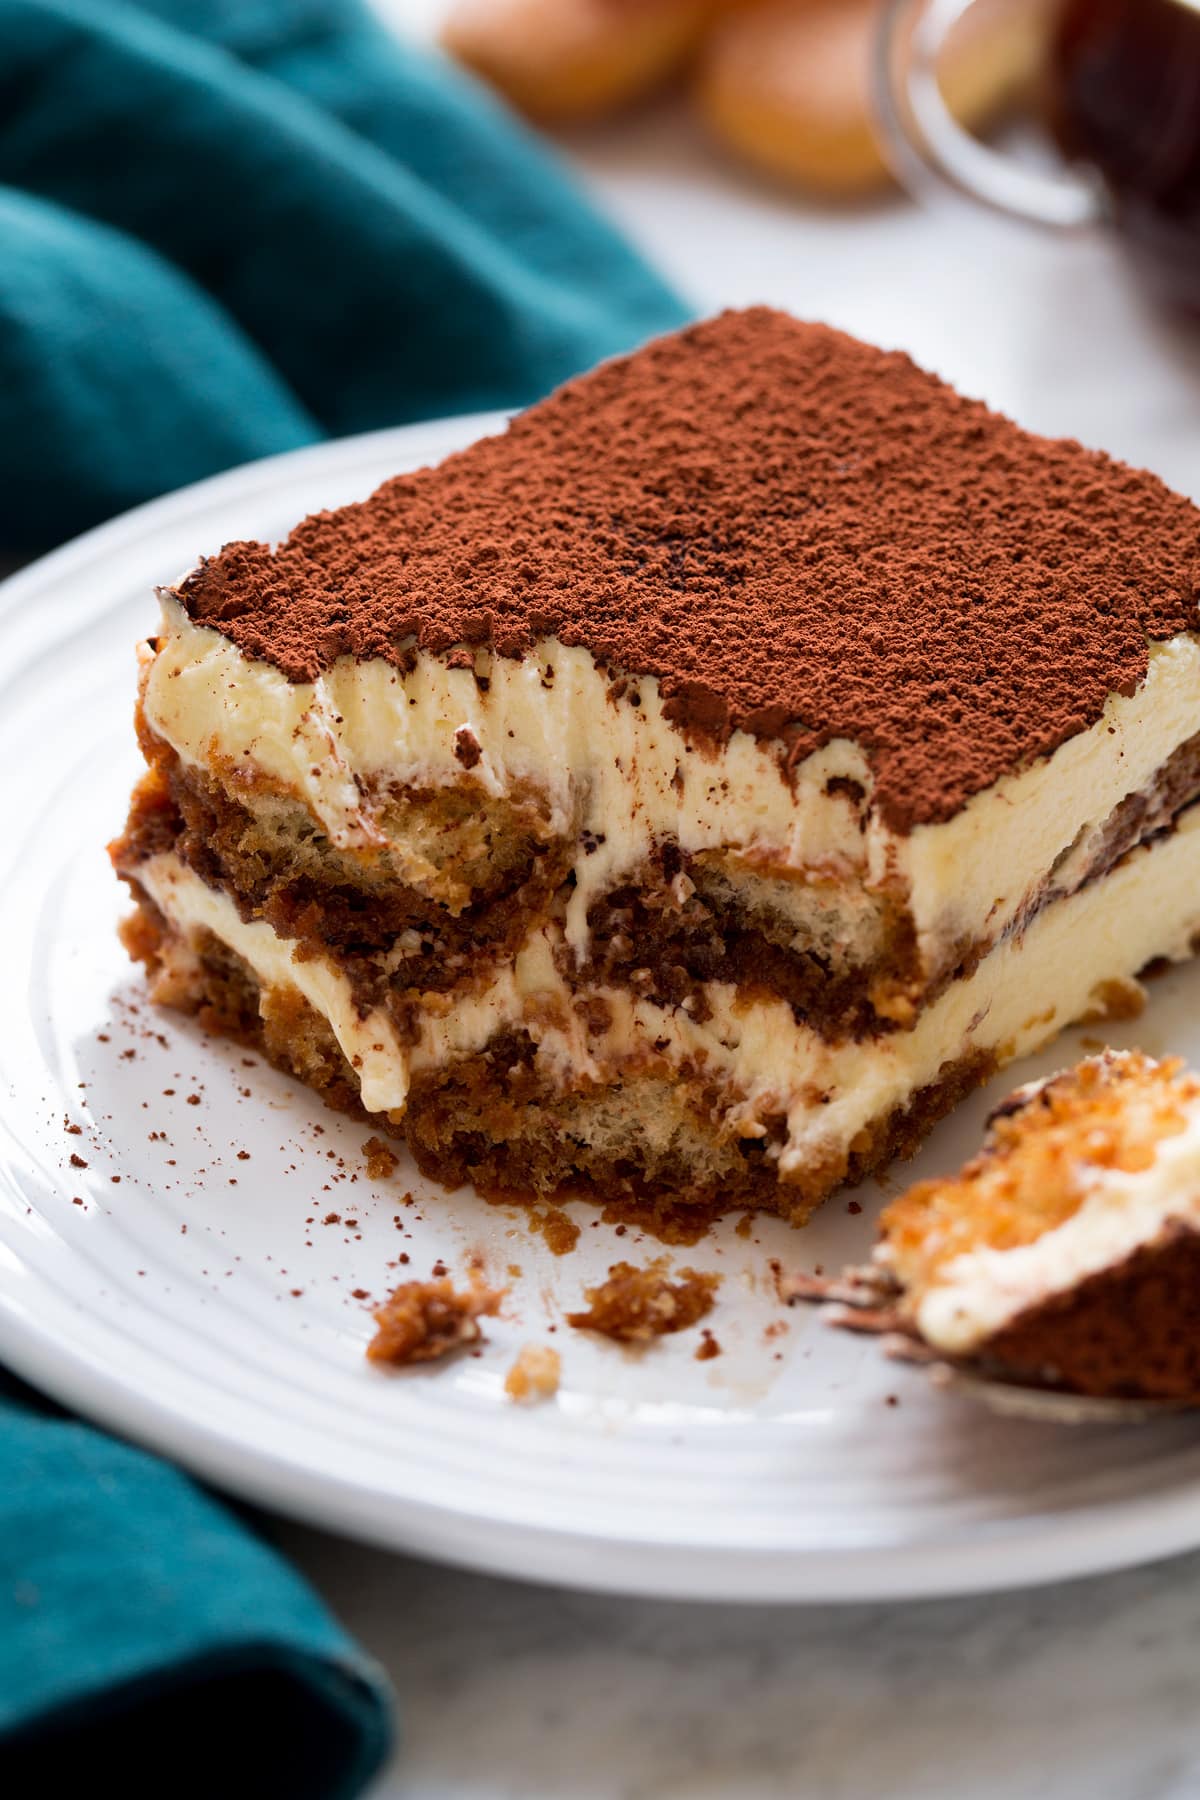 Close up photo of tiramisu cut into with a fork showing layers of custard filling, coffee soaked lady fingers and cocoa powder finish.